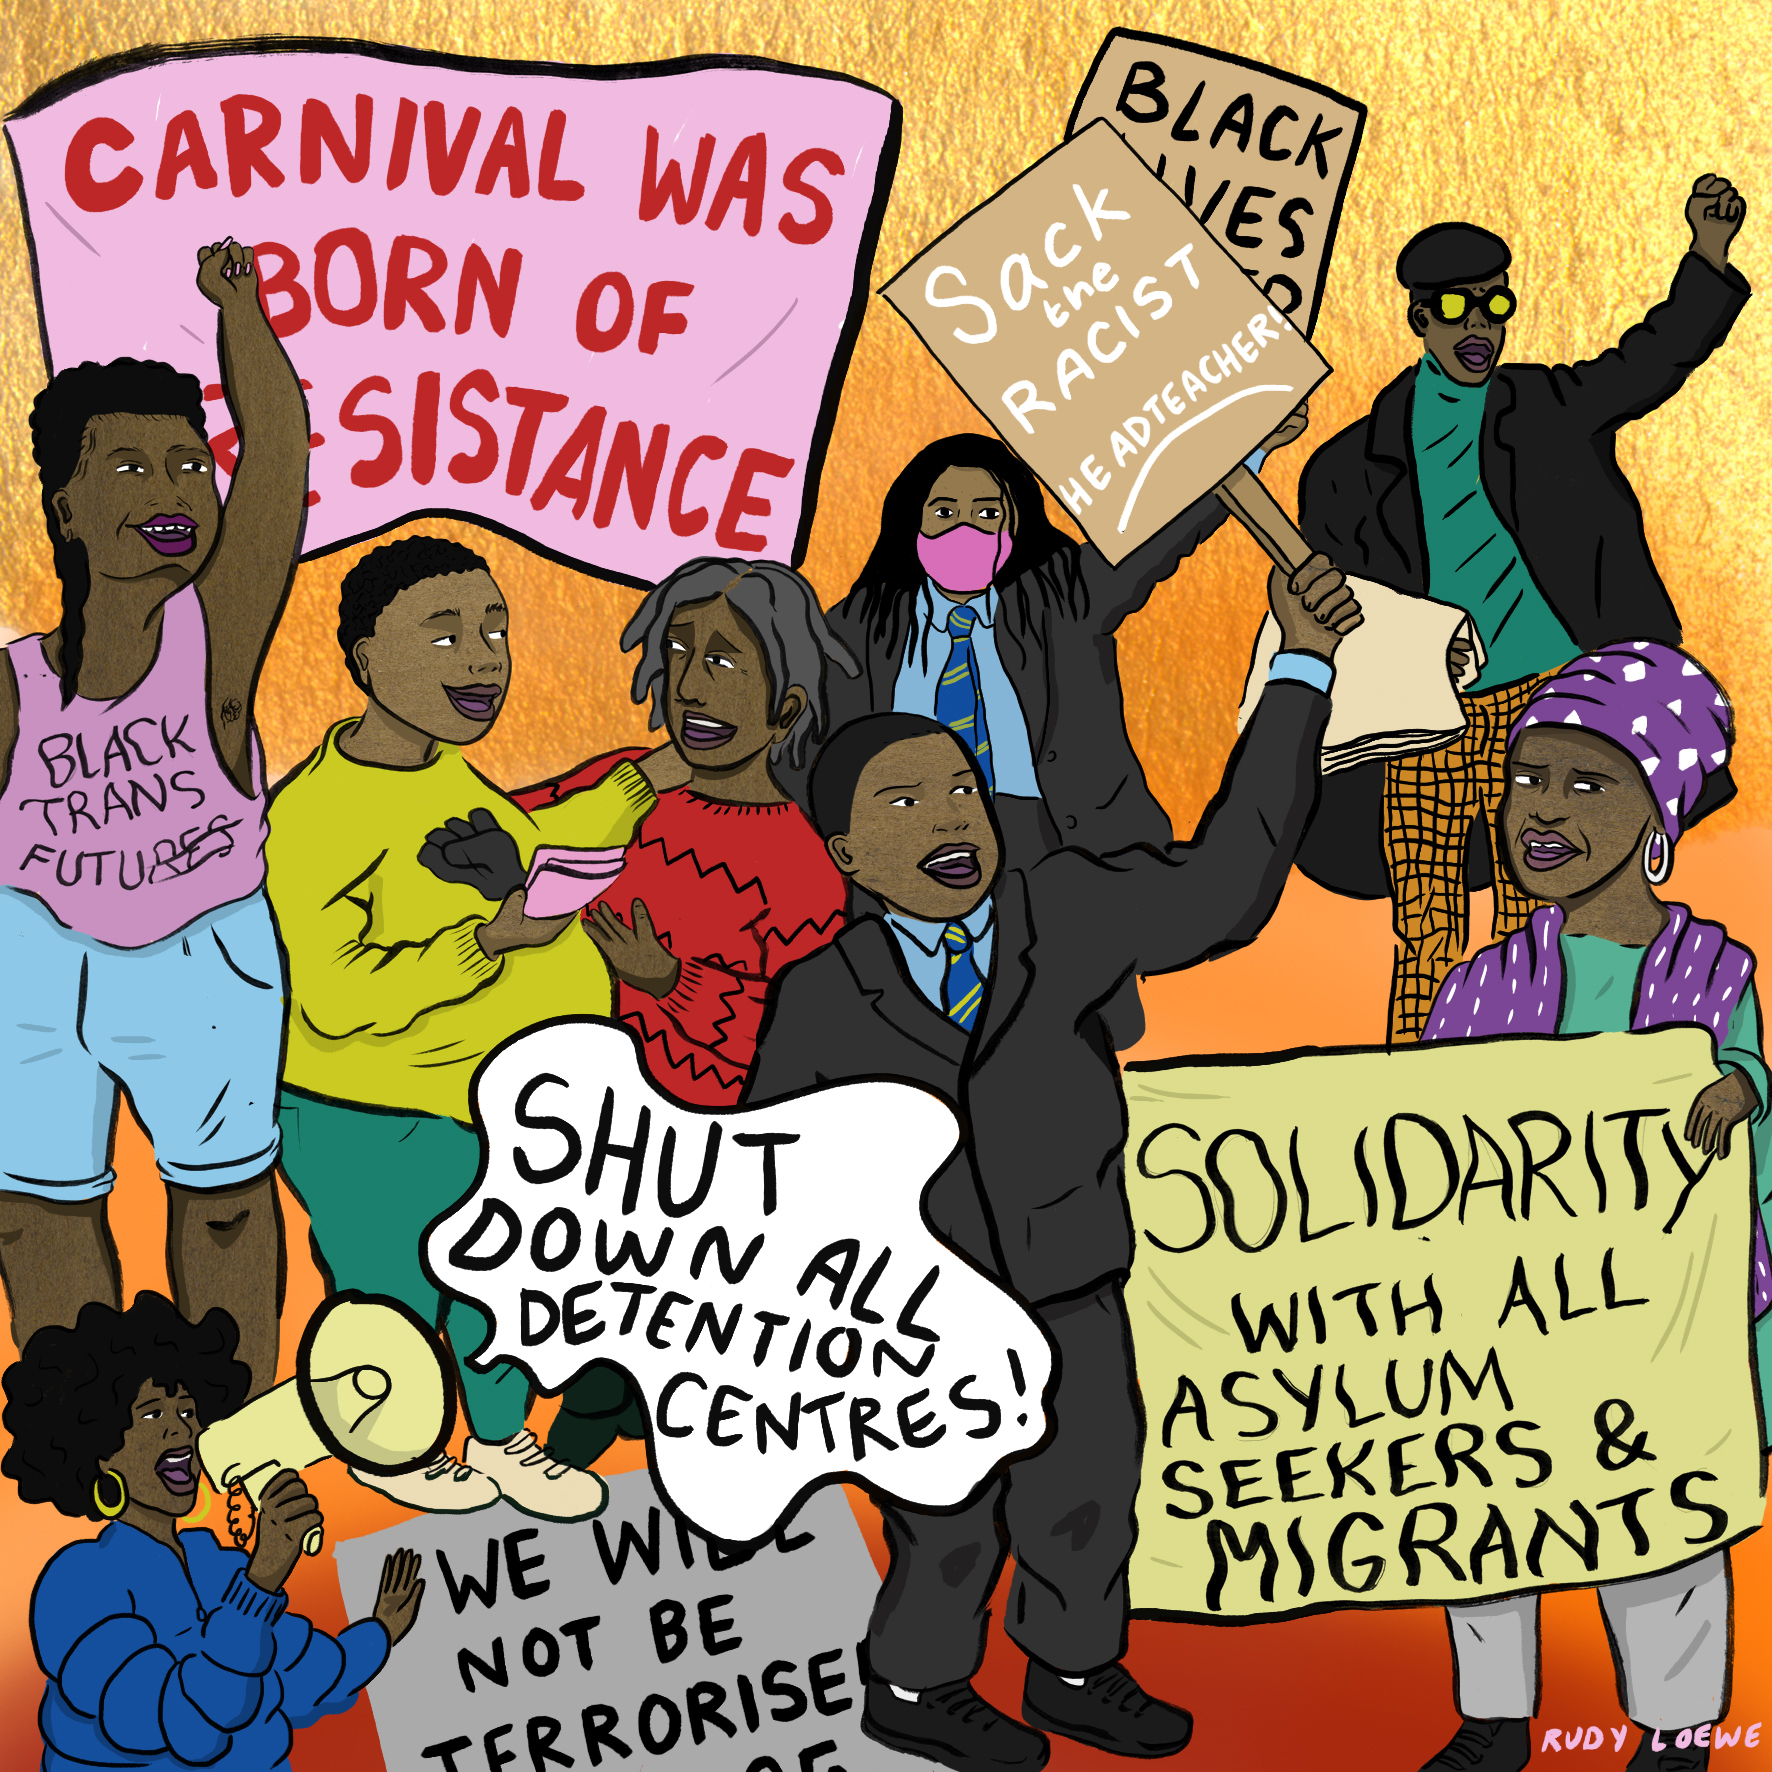 An illustration about resistance and Black people. The image includes protestors and activists from different movements in the UK. This includes an illustration of a person from the British Black Panthers who has their fist in the air, students in school uniforms from Pimlico Academy, banners that says "Carnival was born of resistance” and “Solidarity with all asylum seekers & migrants”. As well as a person with a megaphone shouting "Shut down all detention centres!"